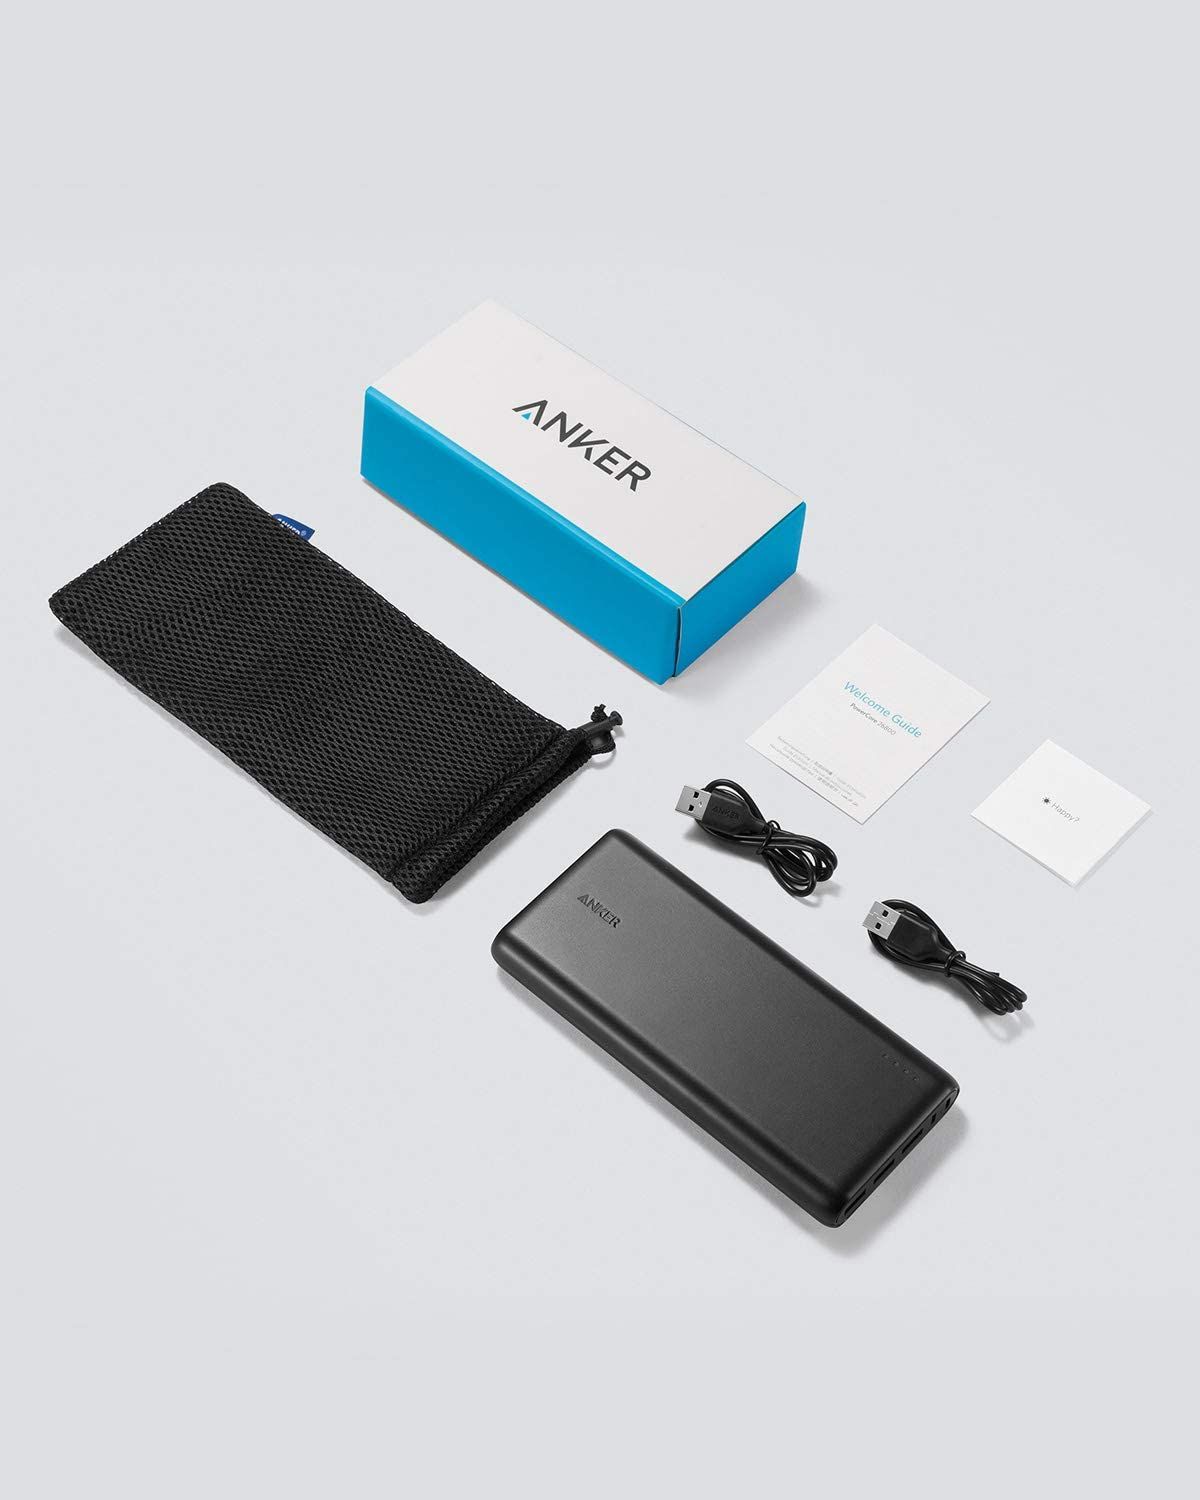 Anker PowerCore 26800 Portable Charger box contents